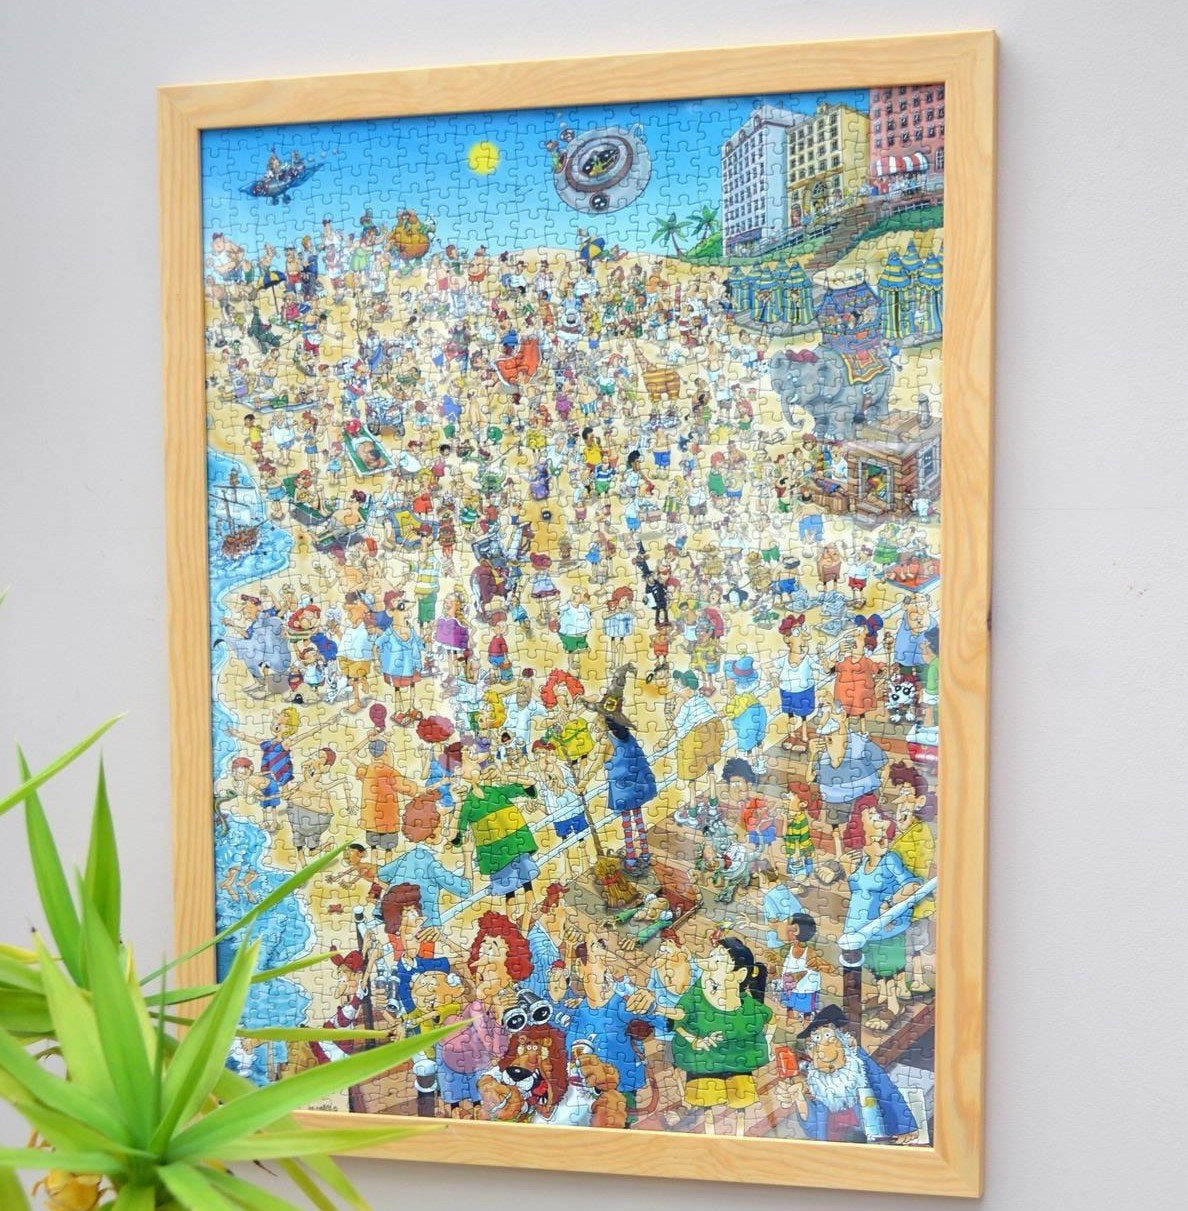 Wooden Frame for AJP Branded 1000 Piece Jigsaw Puzzles